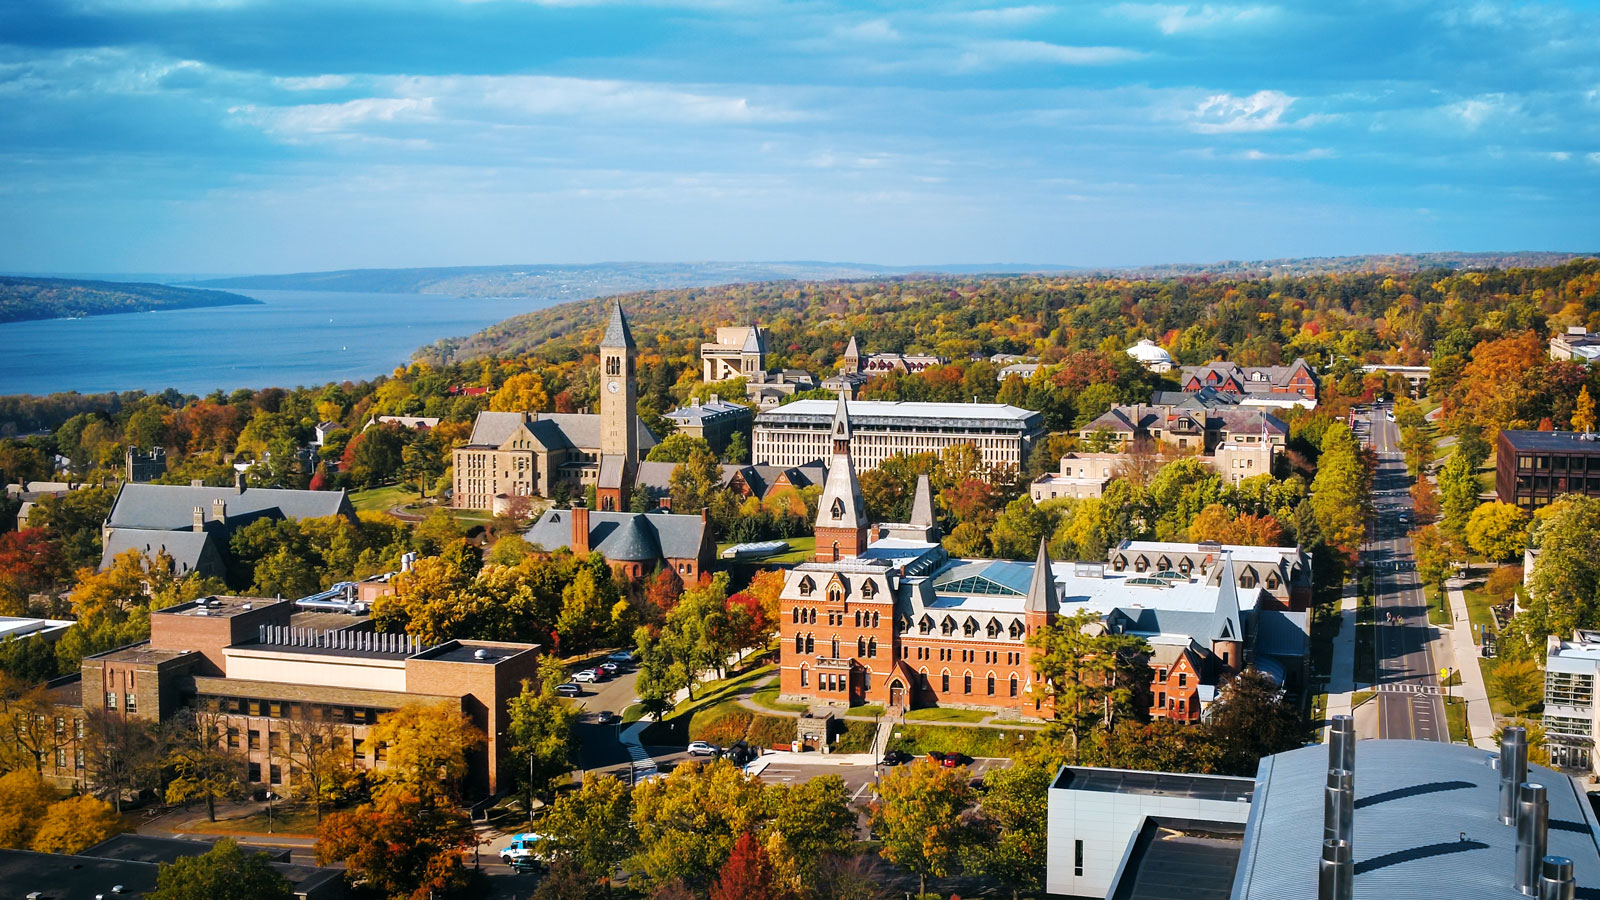 An overhead shot of the Cornell University Campus with Sage Hall in the foreground